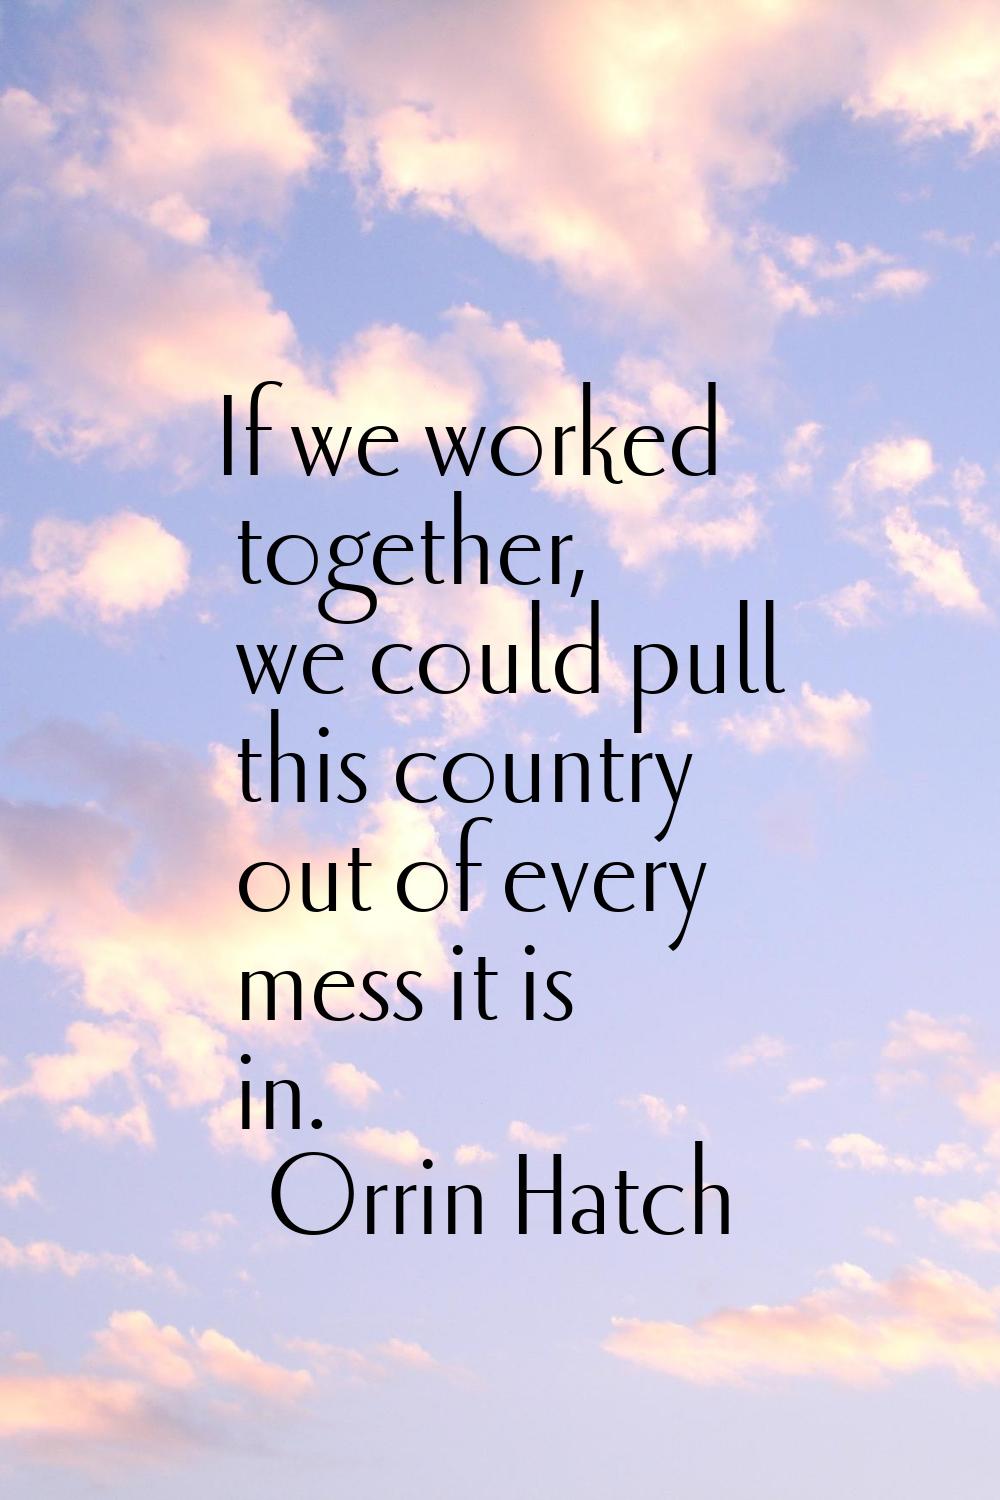 If we worked together, we could pull this country out of every mess it is in.